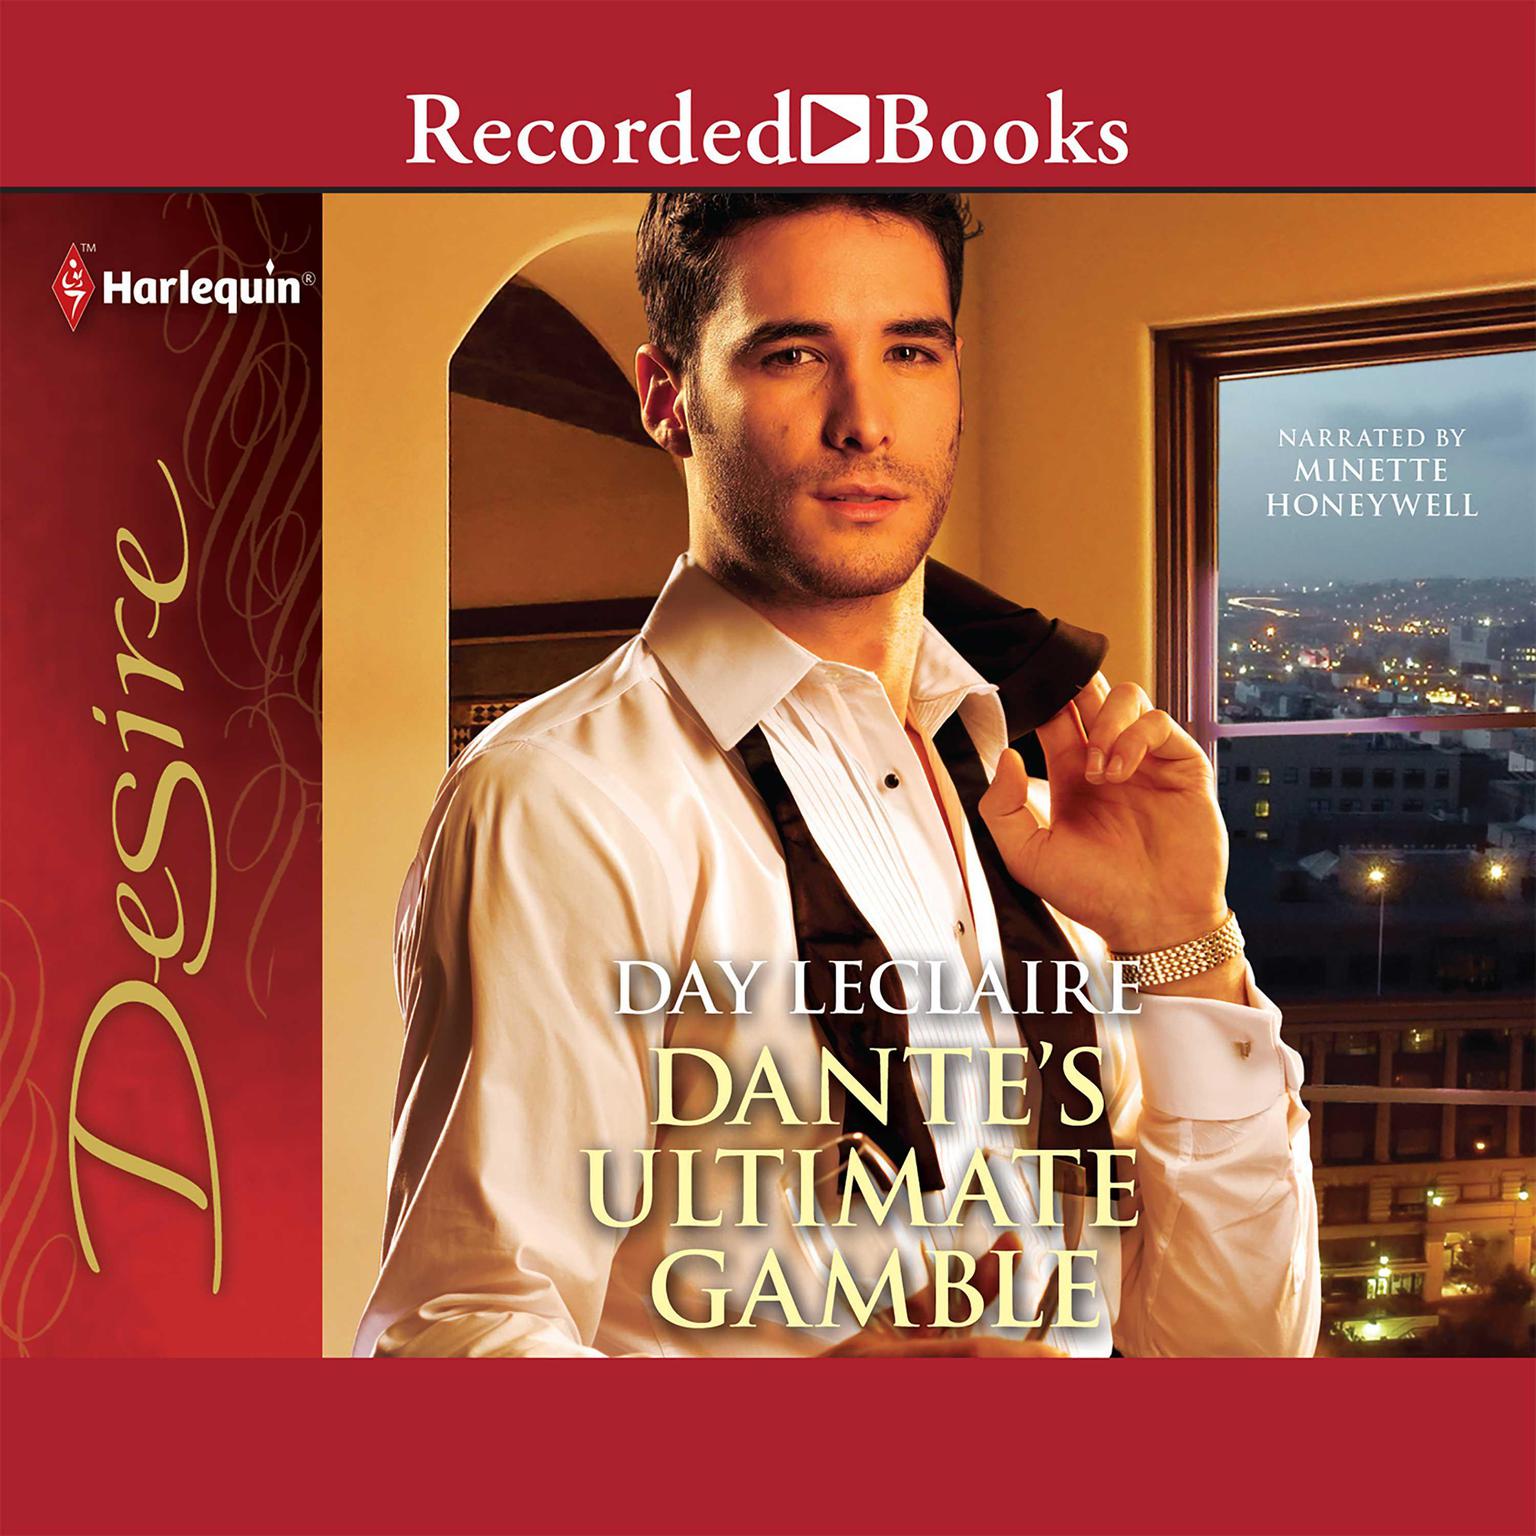 Dantes Ultimate Gamble Audiobook, by Day Leclaire